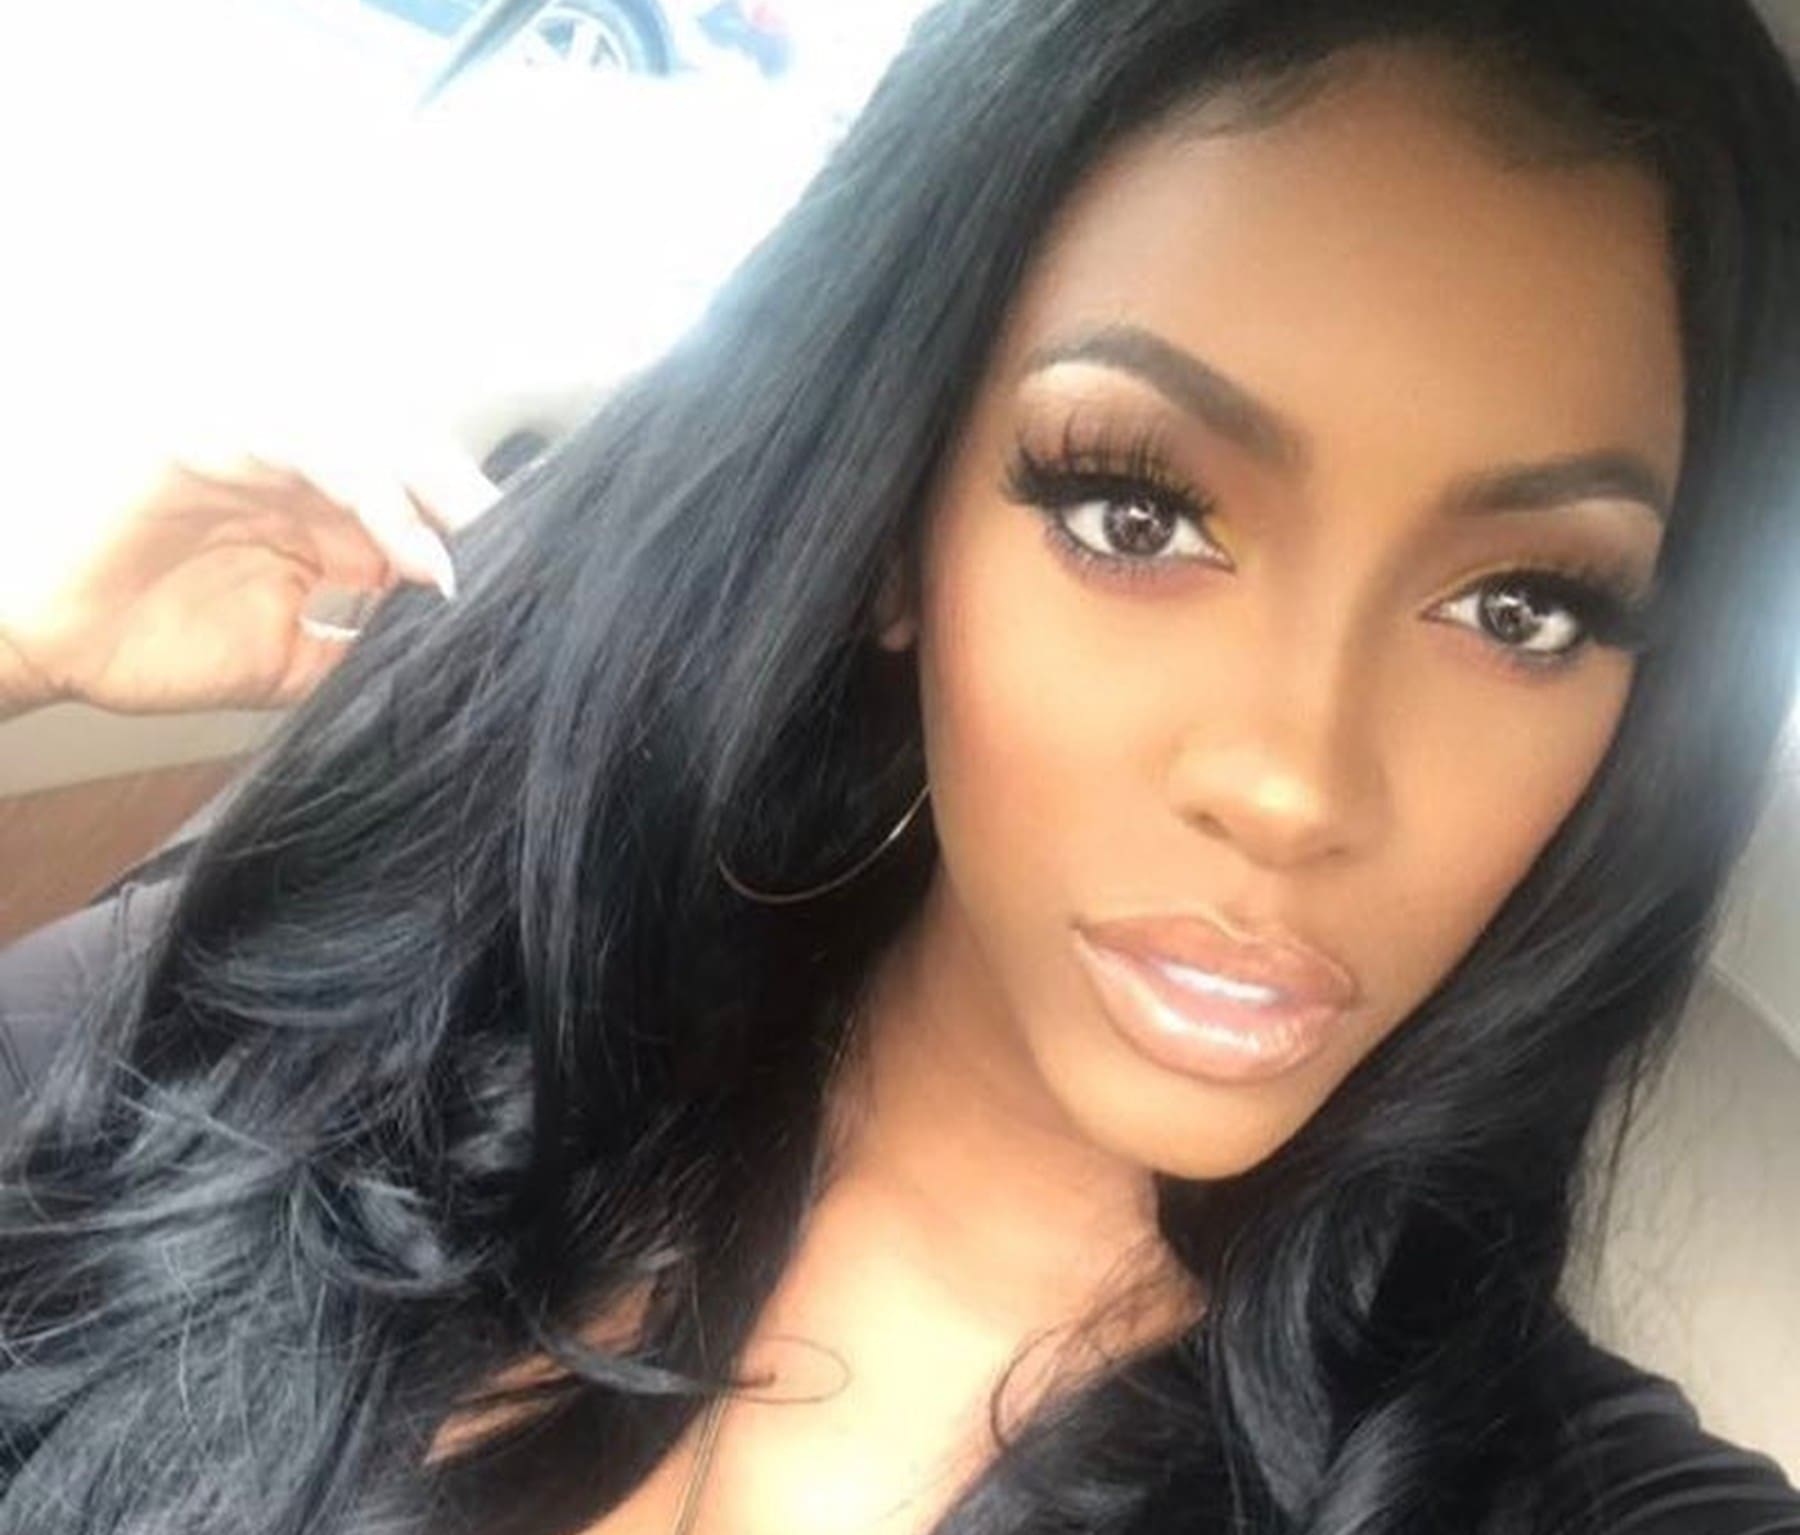 Porsha Williams Desperately Shares One Of Her Problems With Fans, Asking For Help